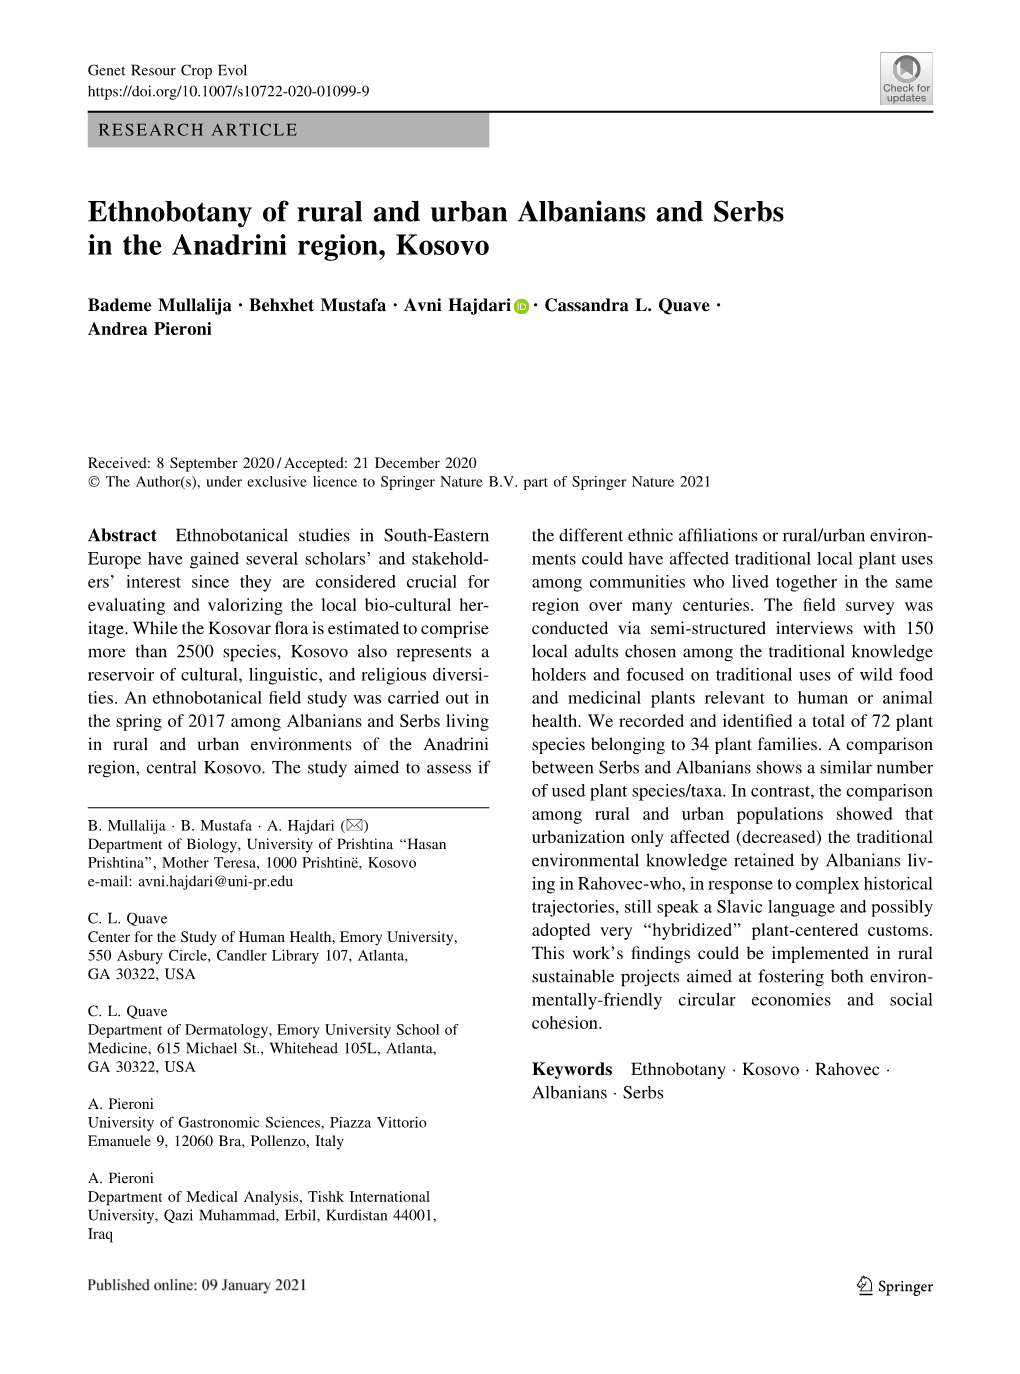 Ethnobotany of Rural and Urban Albanians and Serbs in the Anadrini Region, Kosovo